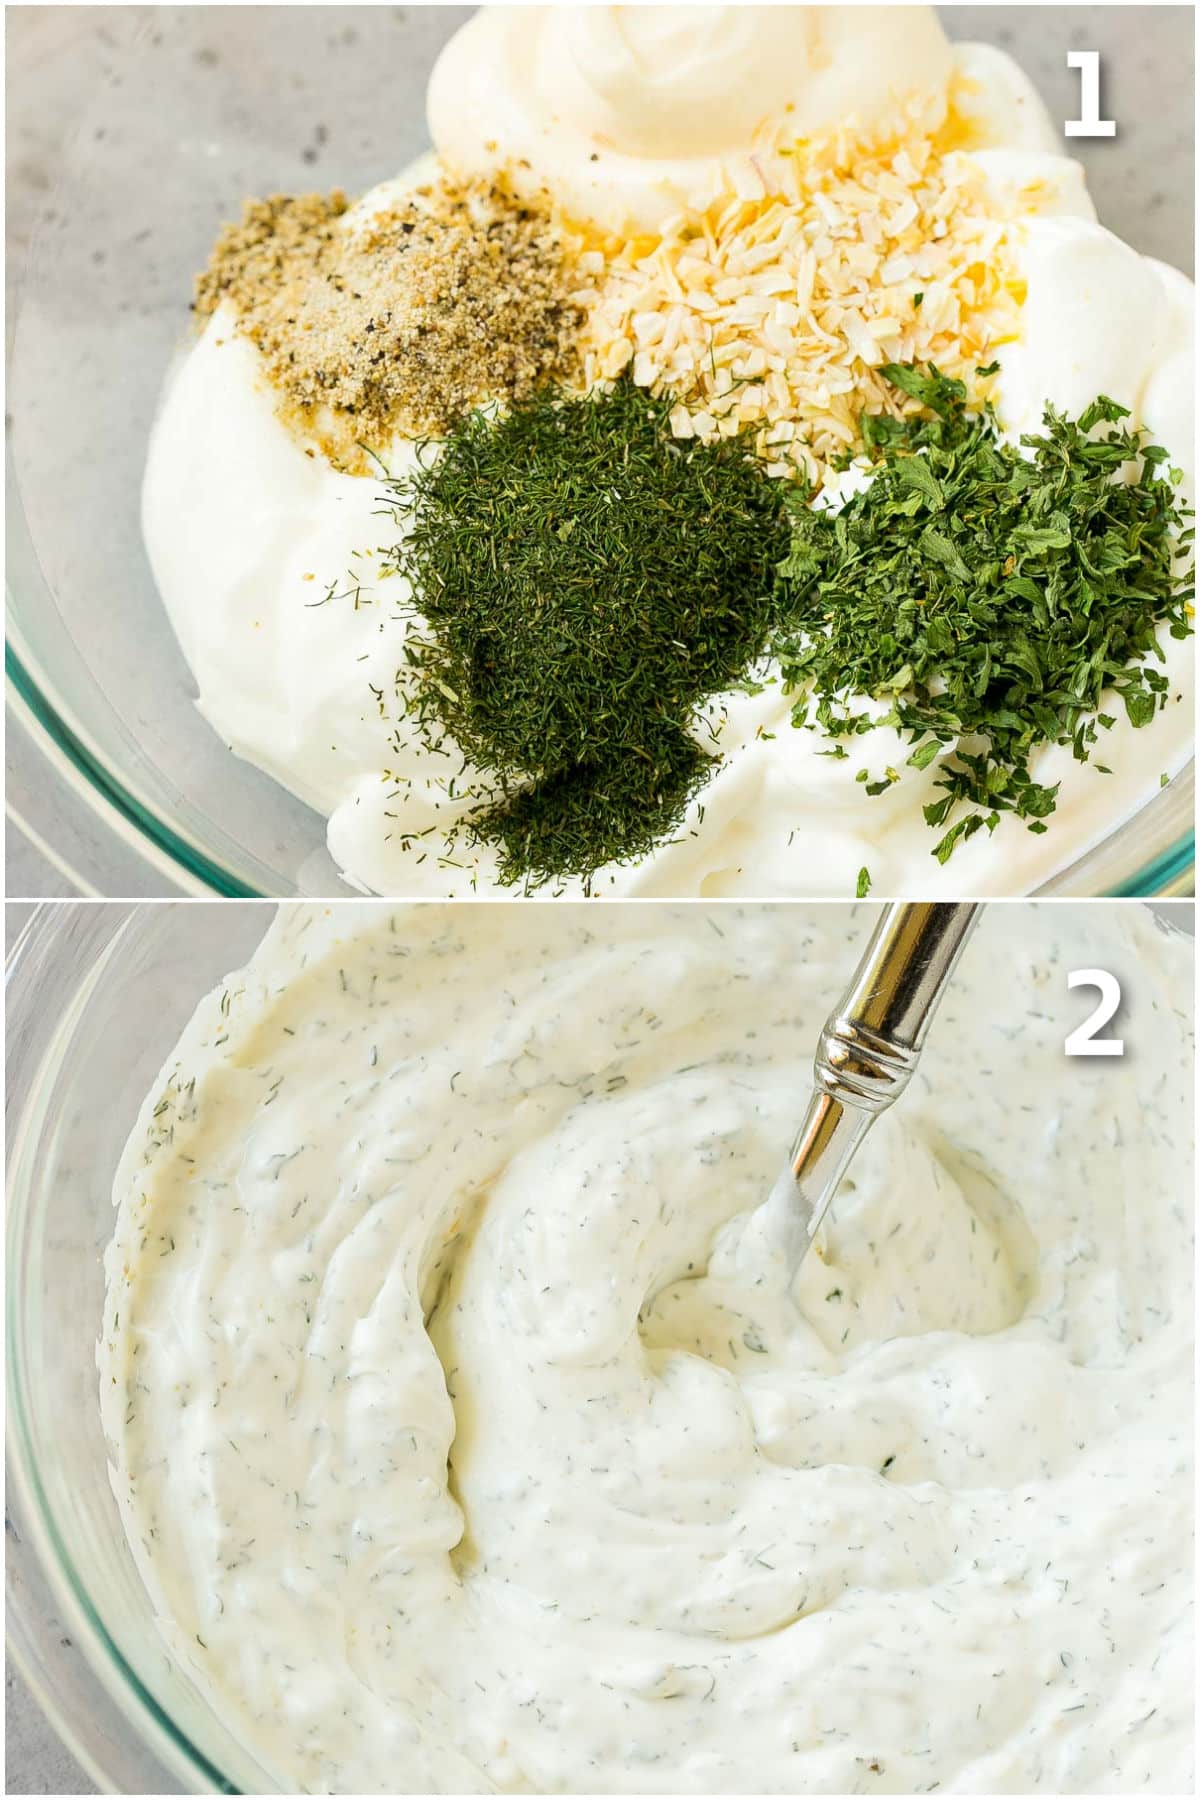 Step by step shots showing how to stir together dip ingredients.